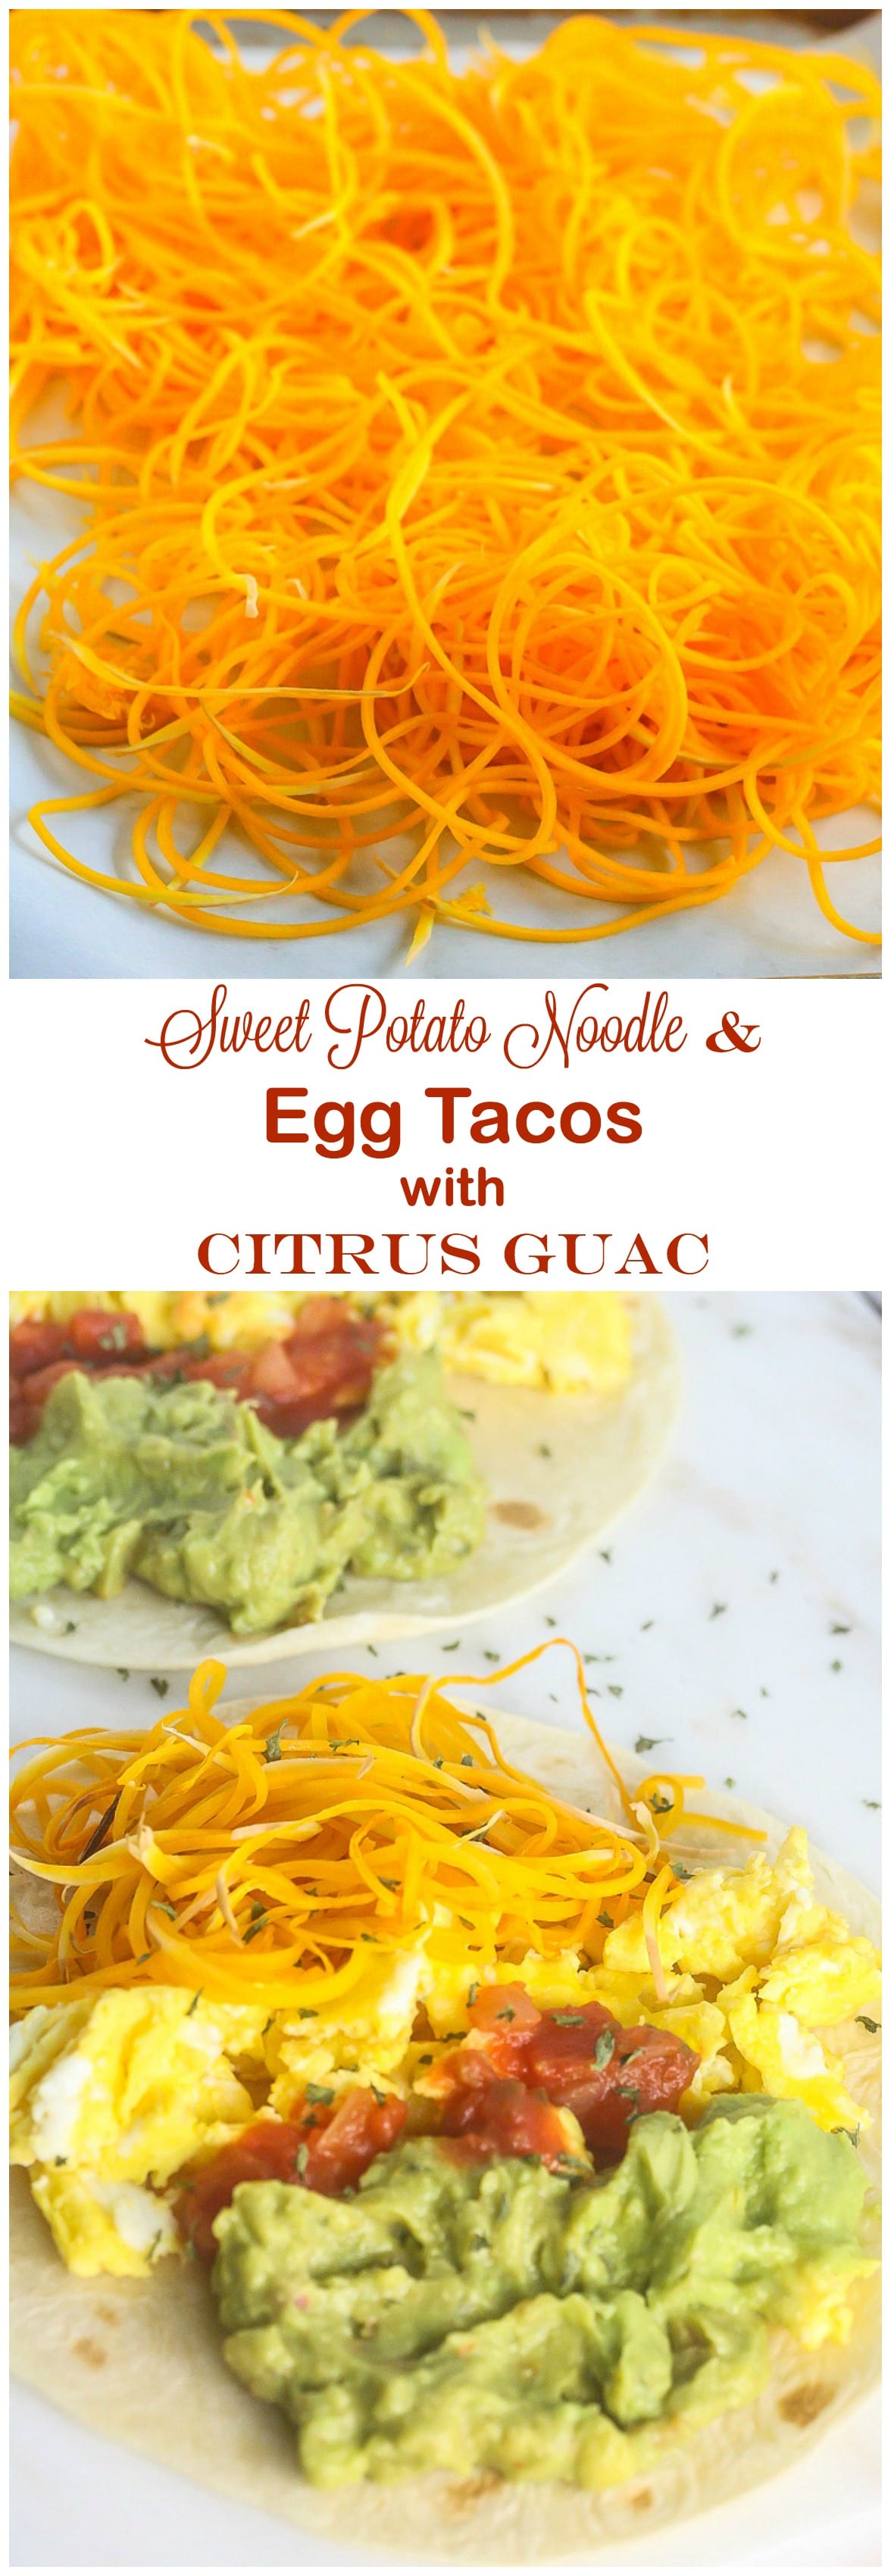 These delicious, healthy Sweet Potato Egg Tacos with Citrus Guacamole are from Superfood Weeknight Meals.